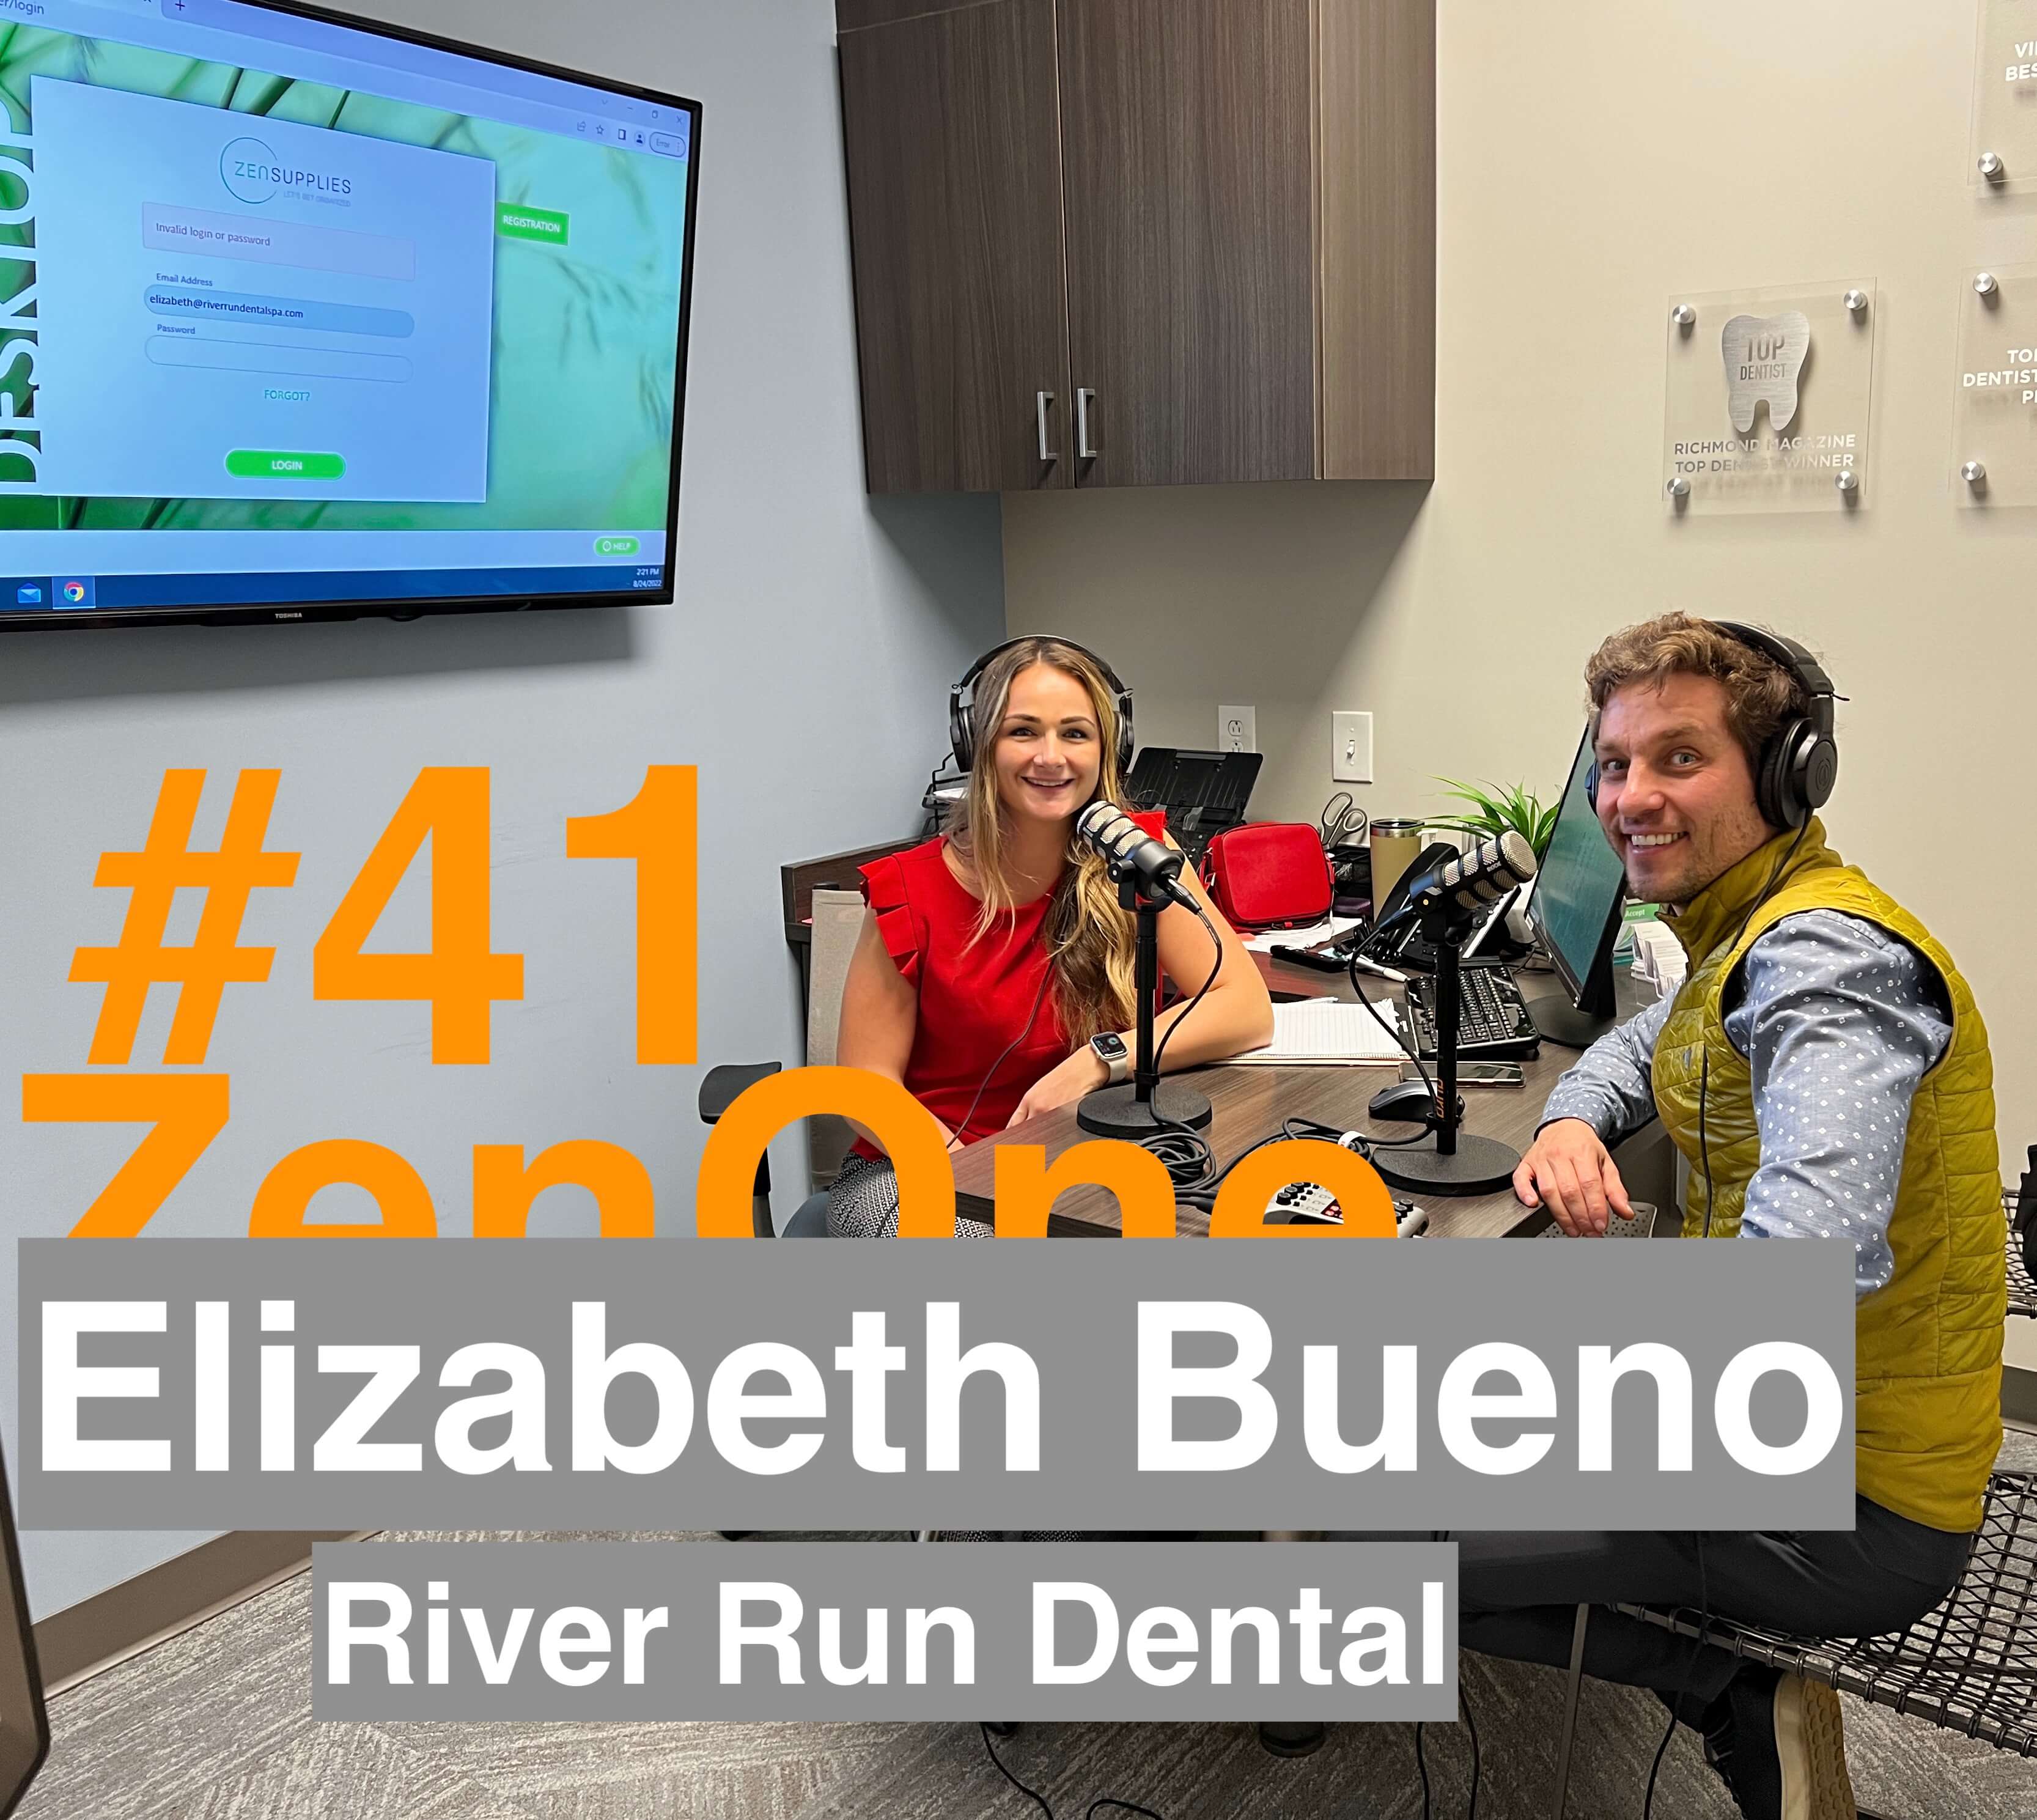 #41 Elizabeth Bueno, Clinical Director of River Run Dental. Exciting Story of Growth, Focus and Team work.